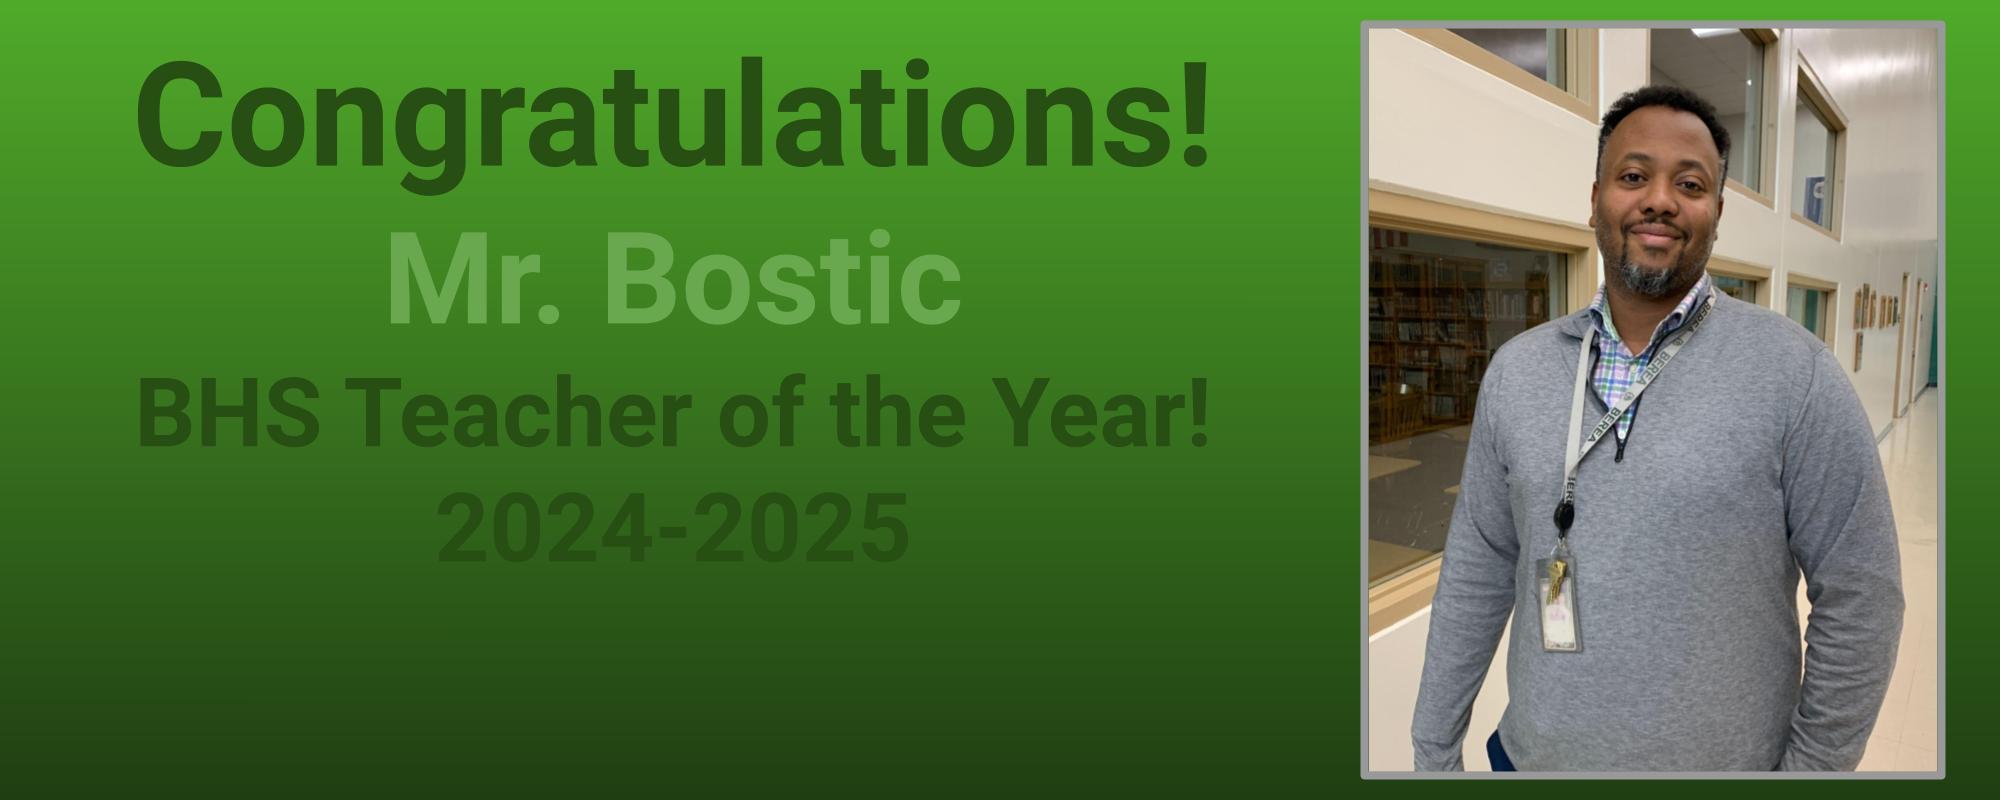 Bostic teacher of the year